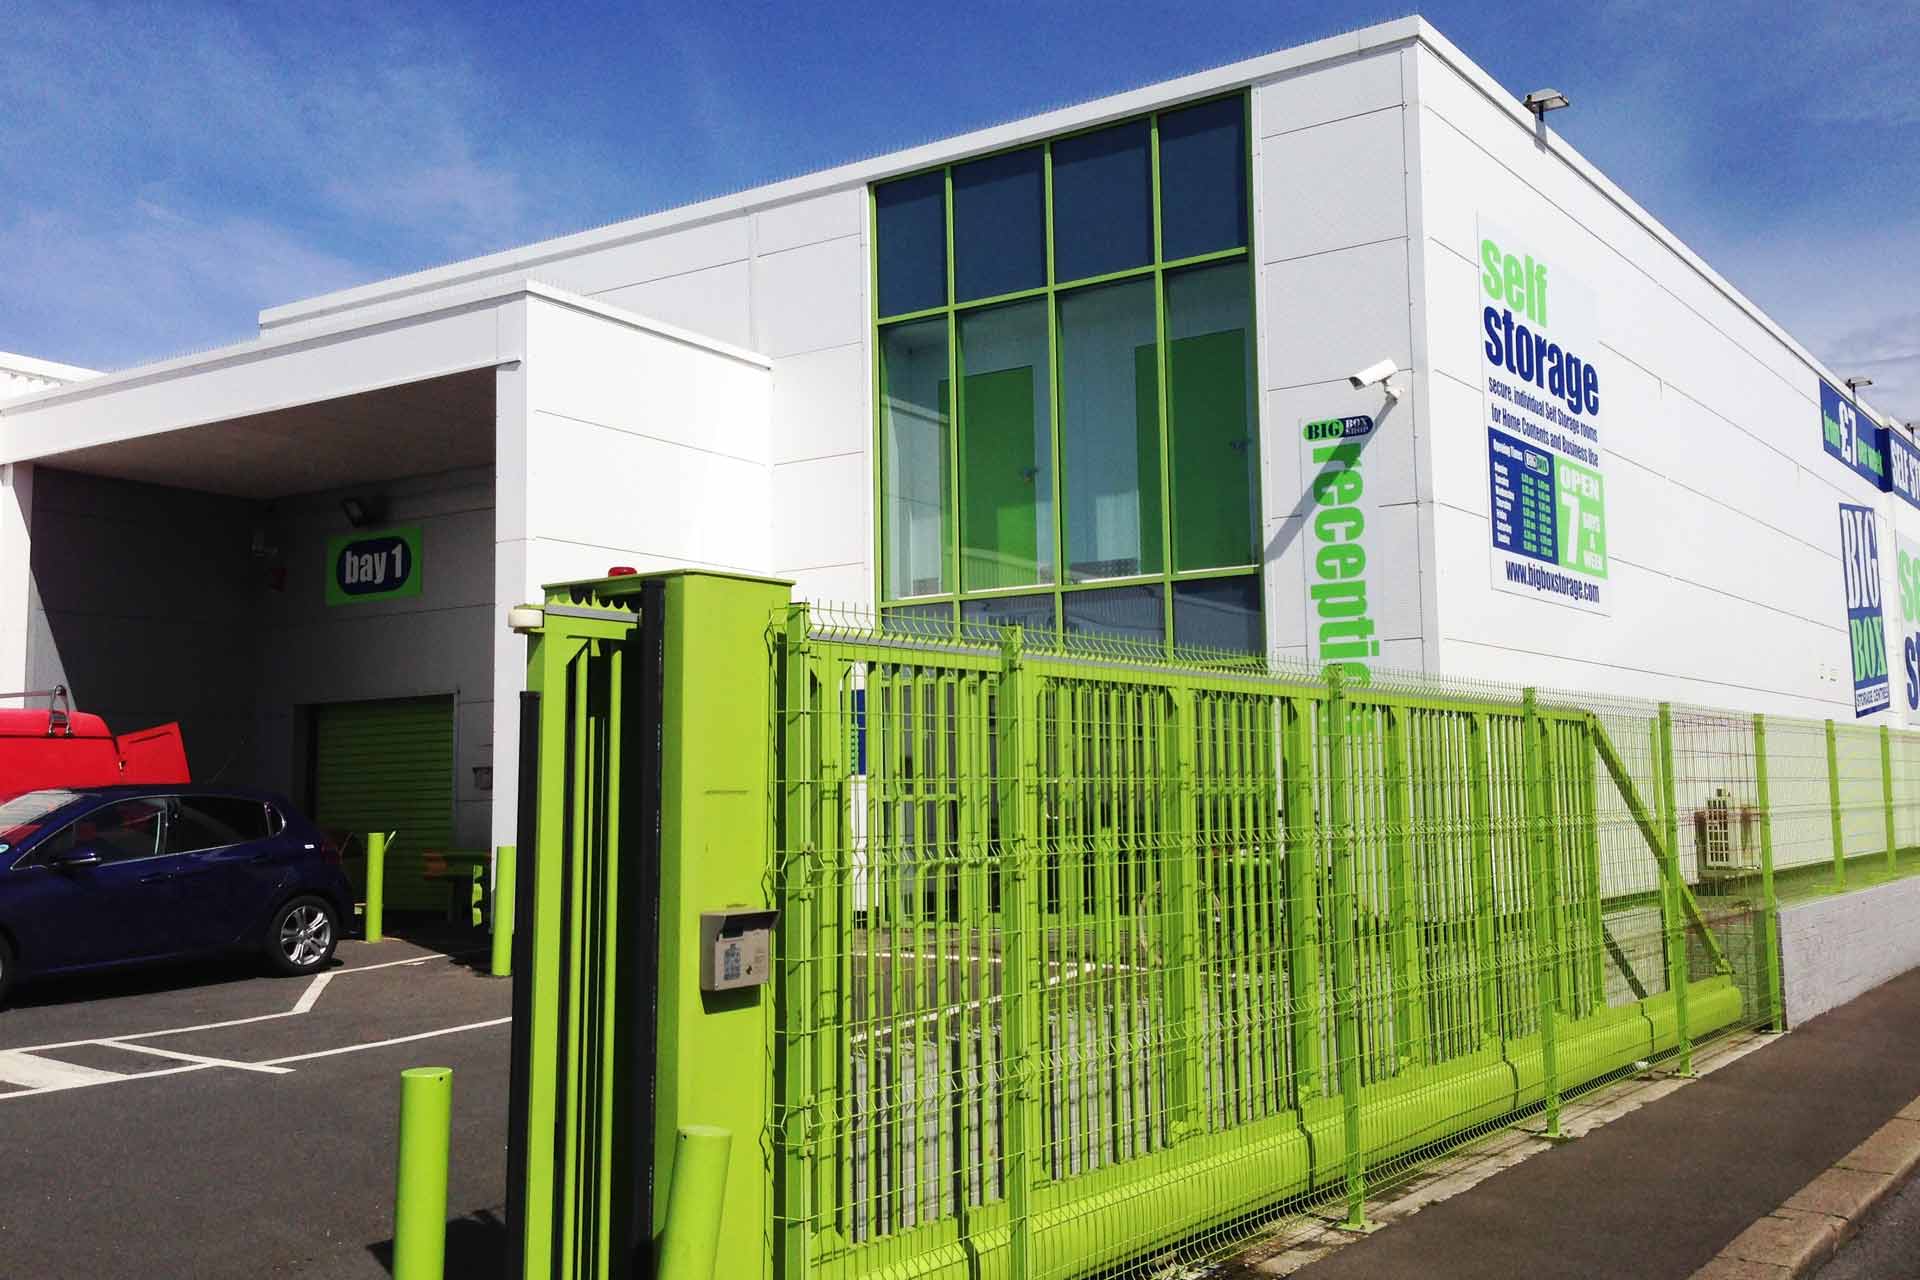 Featured image for Big Box Self Storage Hove, East Sussex.